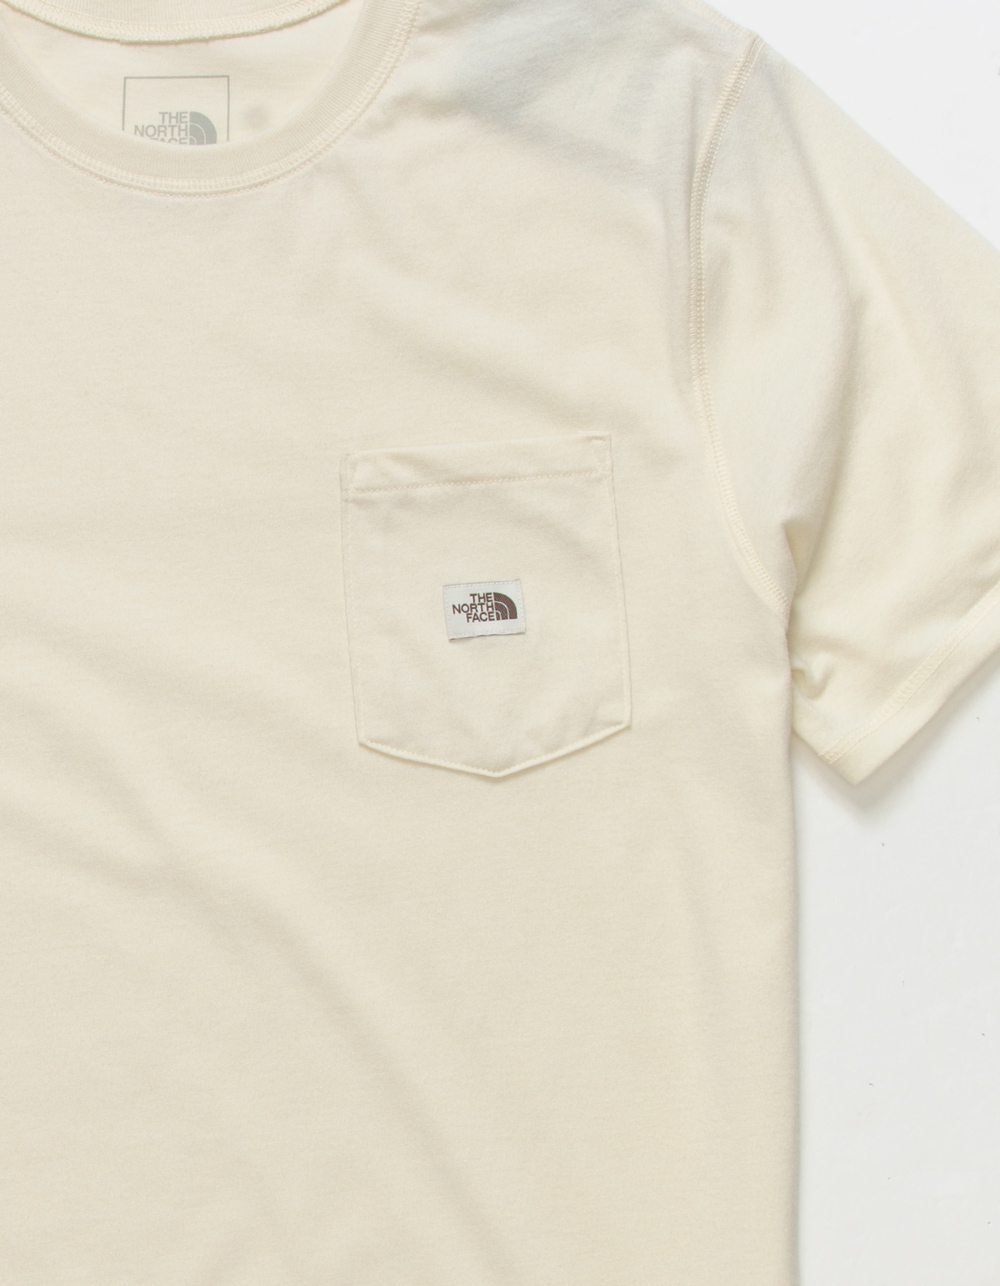 THE NORTH FACE Heritage Patch Mens Pocket Tee - OFF WHITE | Tillys